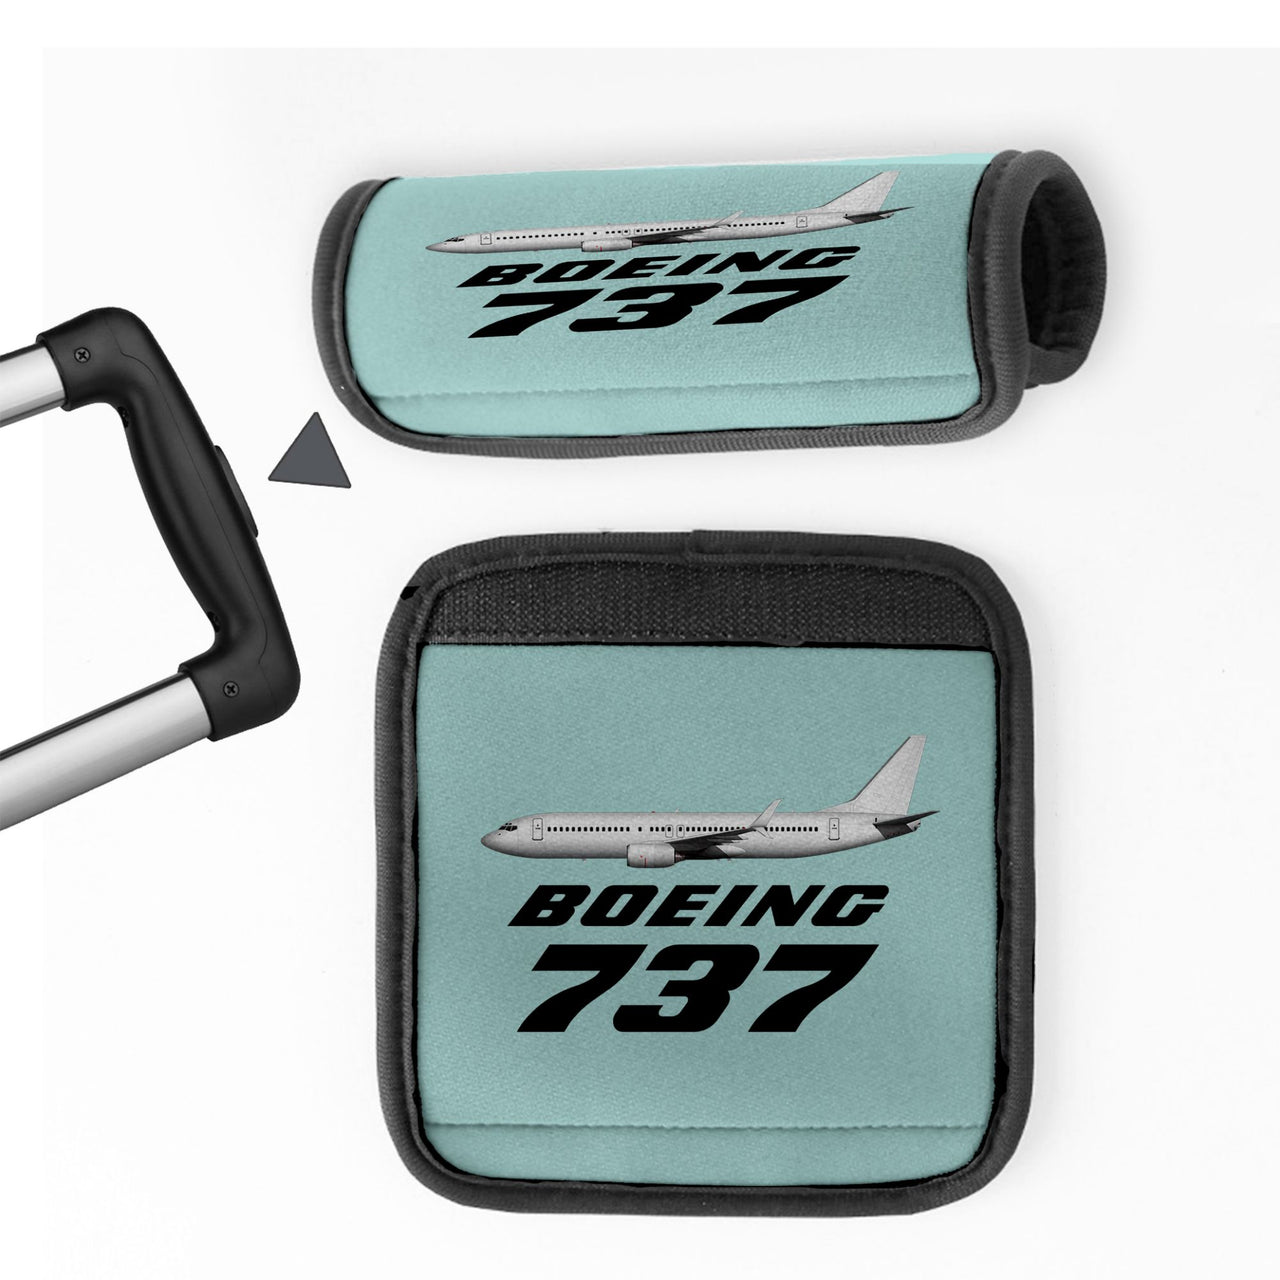 The Boeing 737 Designed Neoprene Luggage Handle Covers